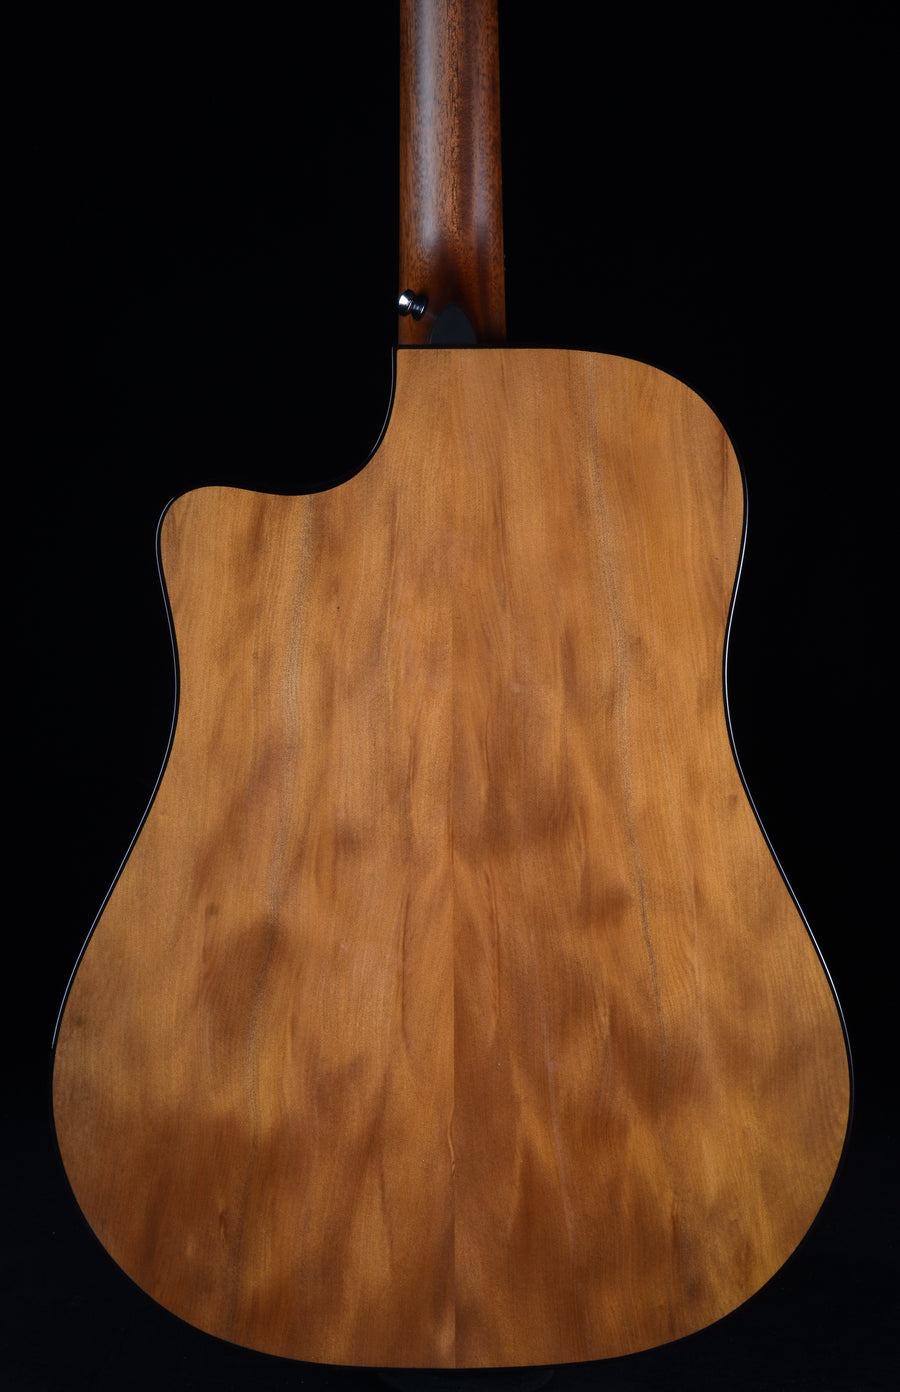 Bedell Limited Edition Dreadnought Adirondack - Ancient Kauri